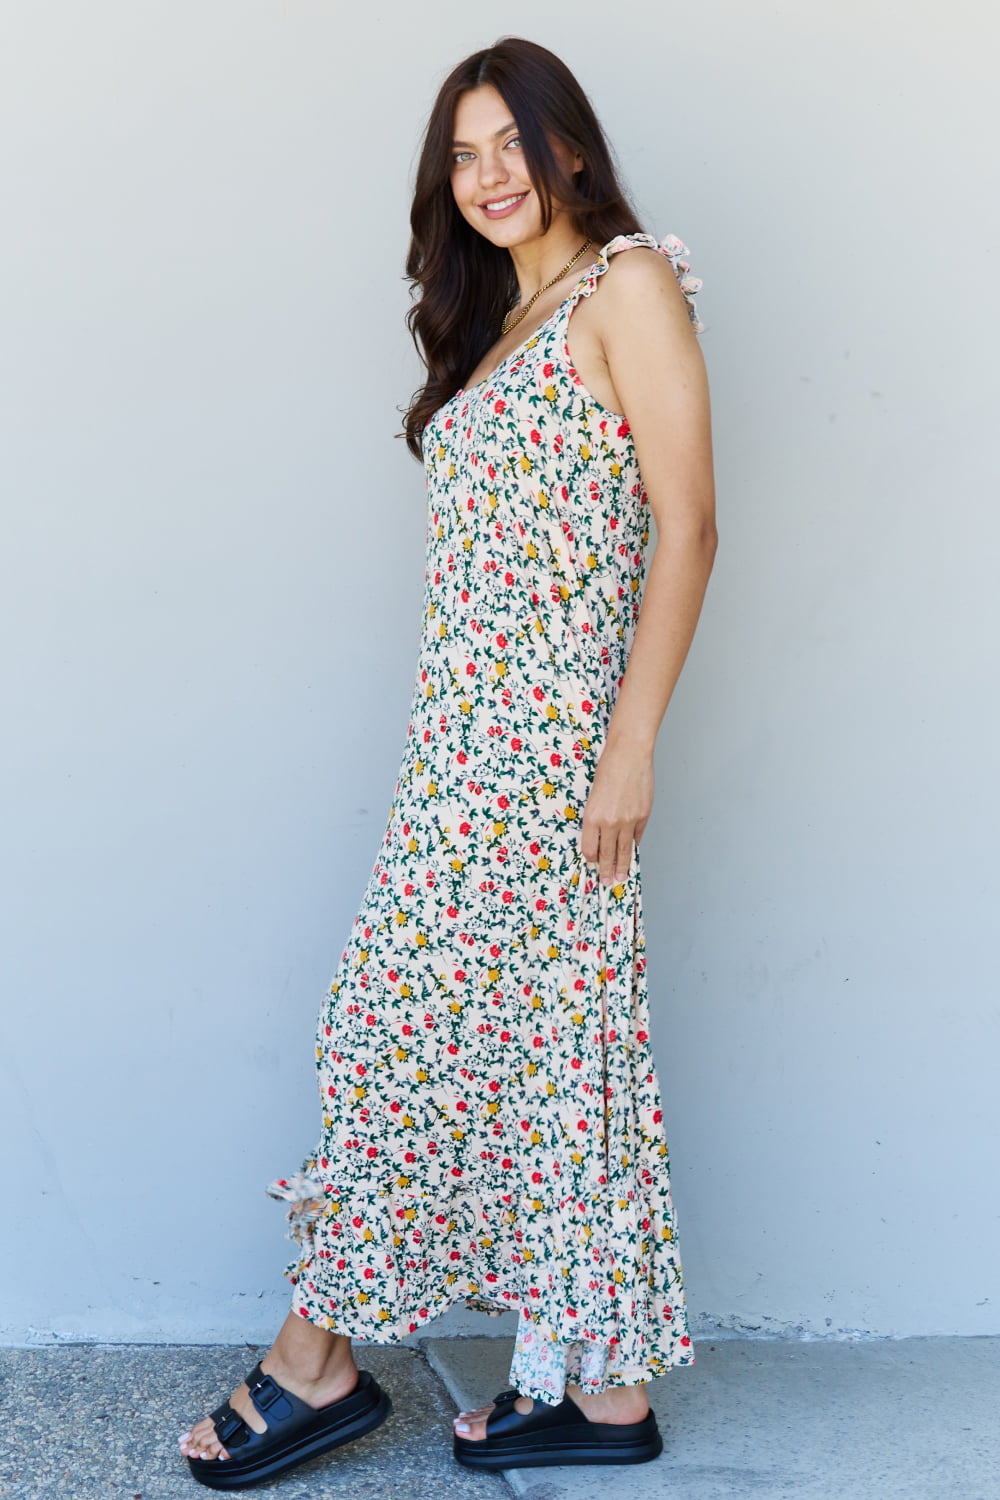 Light Steel Blue Doublju In The Garden Ruffle Floral Maxi Dress in Natural Rose Sentient Beauty Fashions Apparel & Accessories